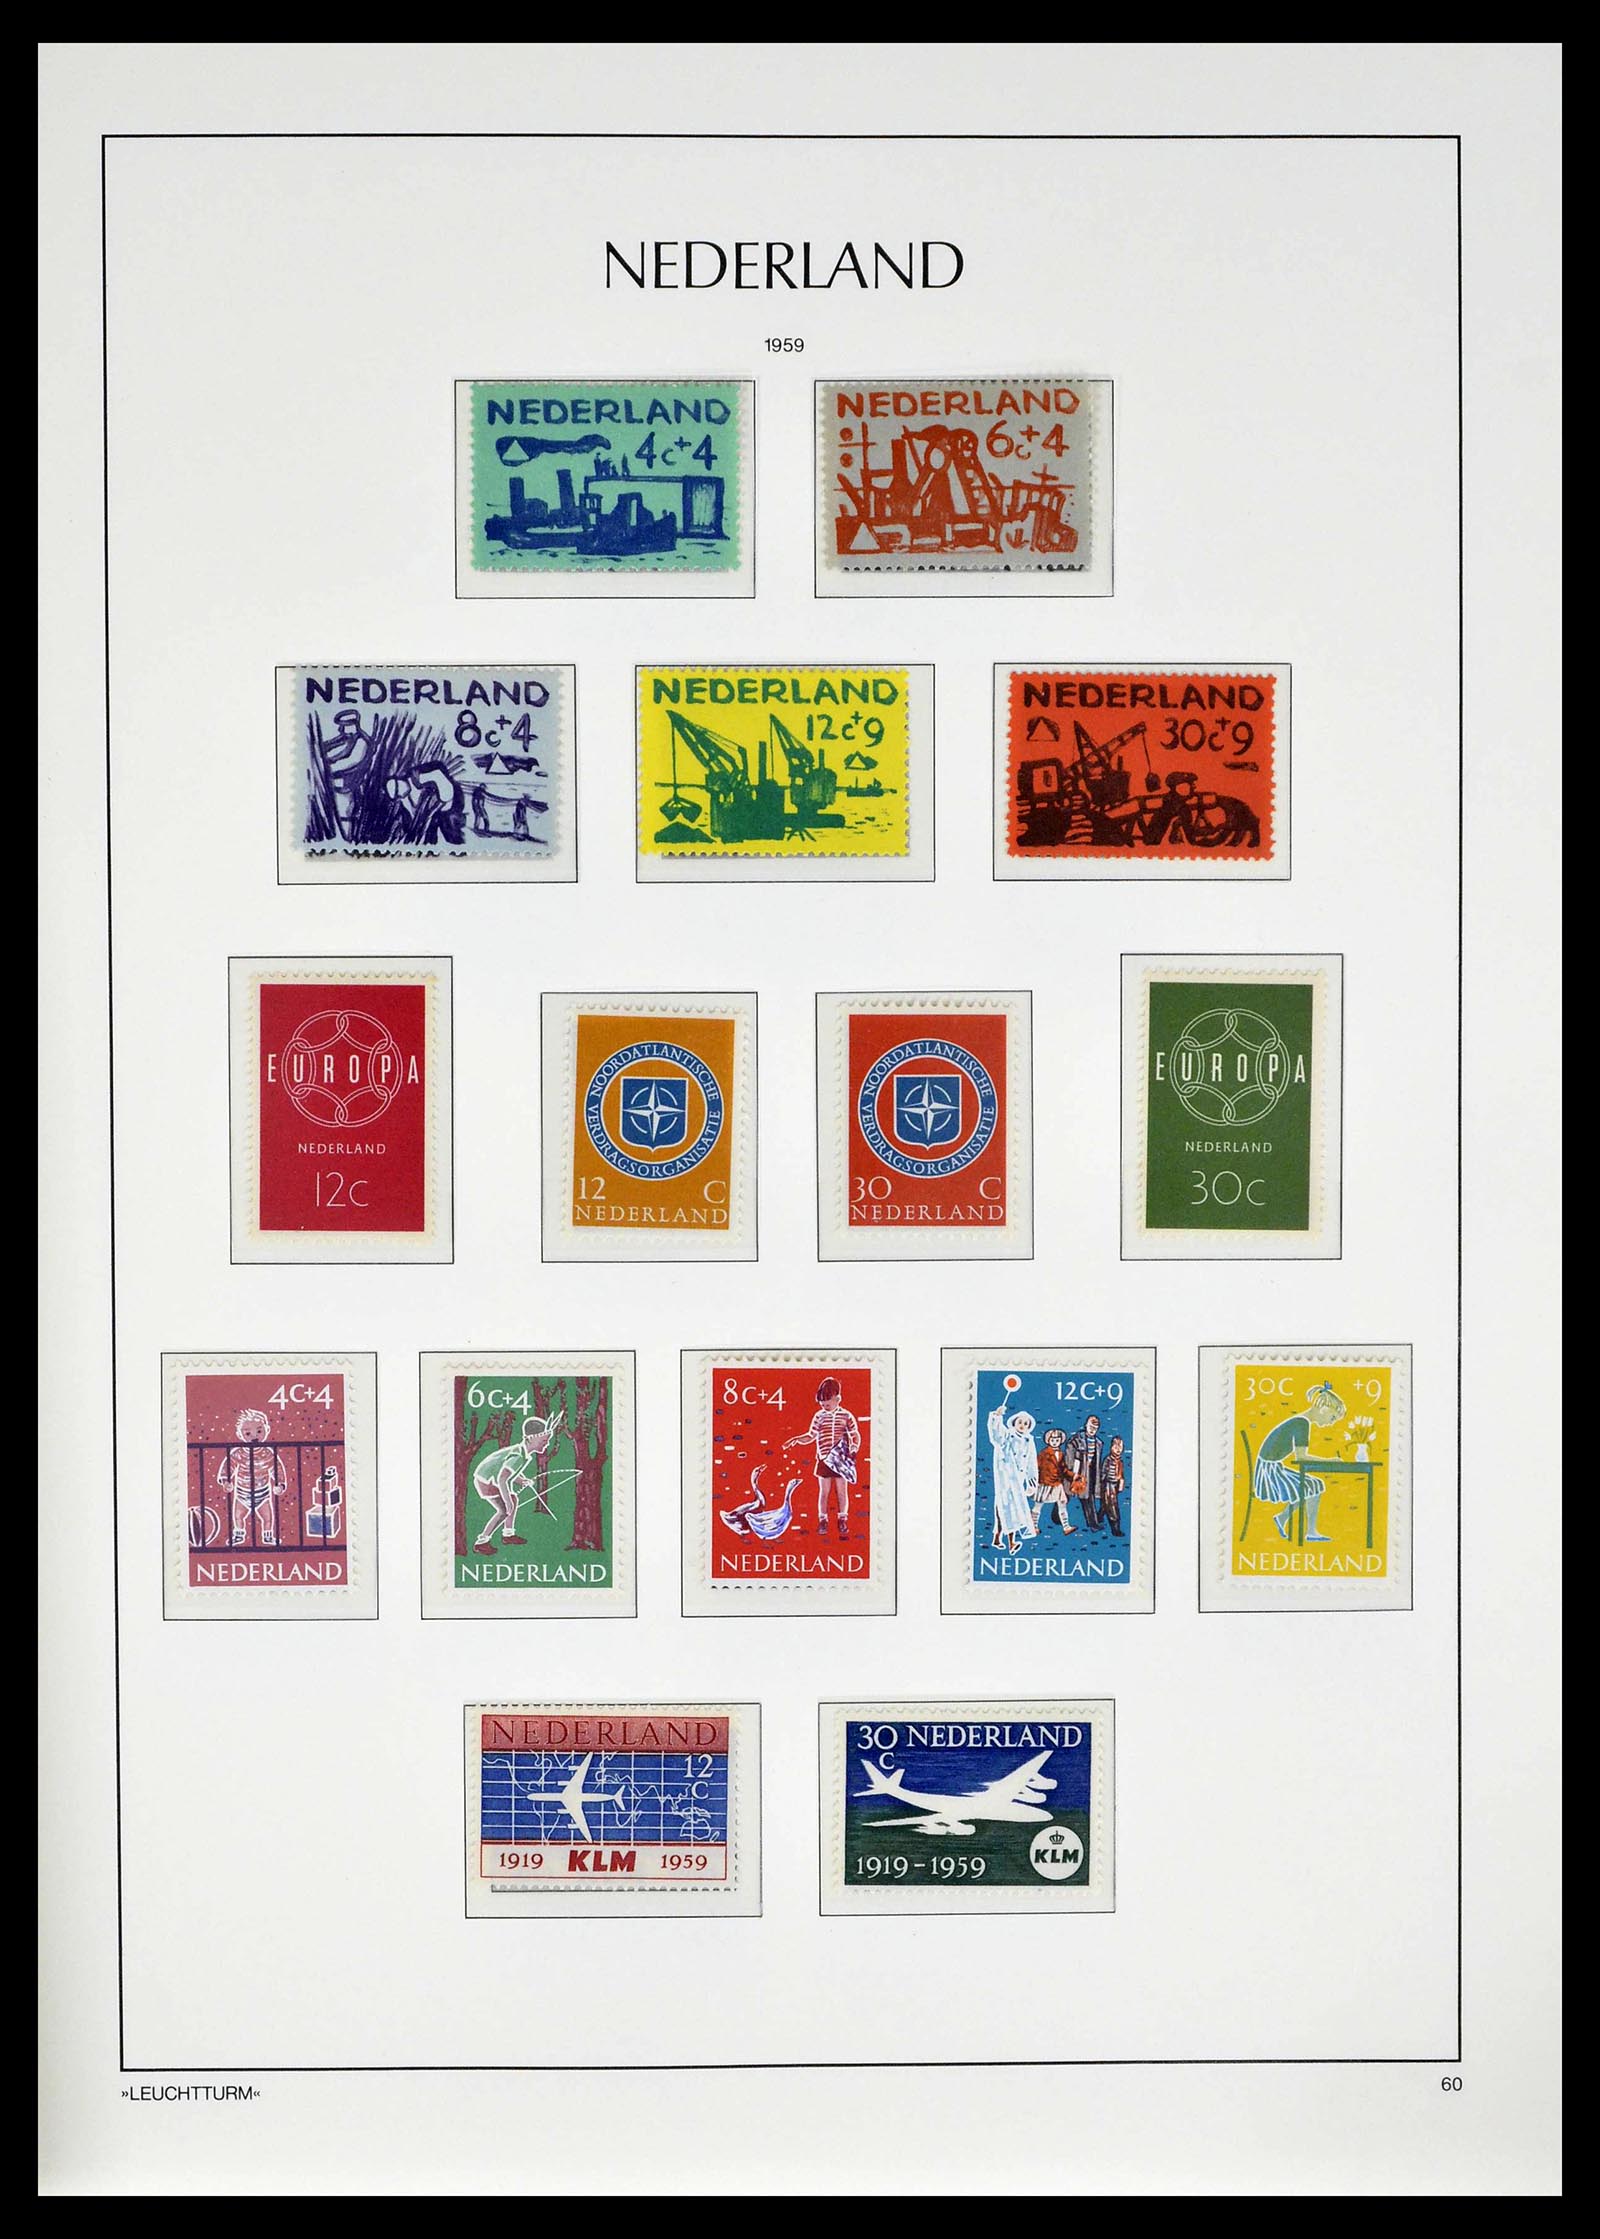 39135 0084 - Stamp collection 39135 Netherlands 1852-1969.